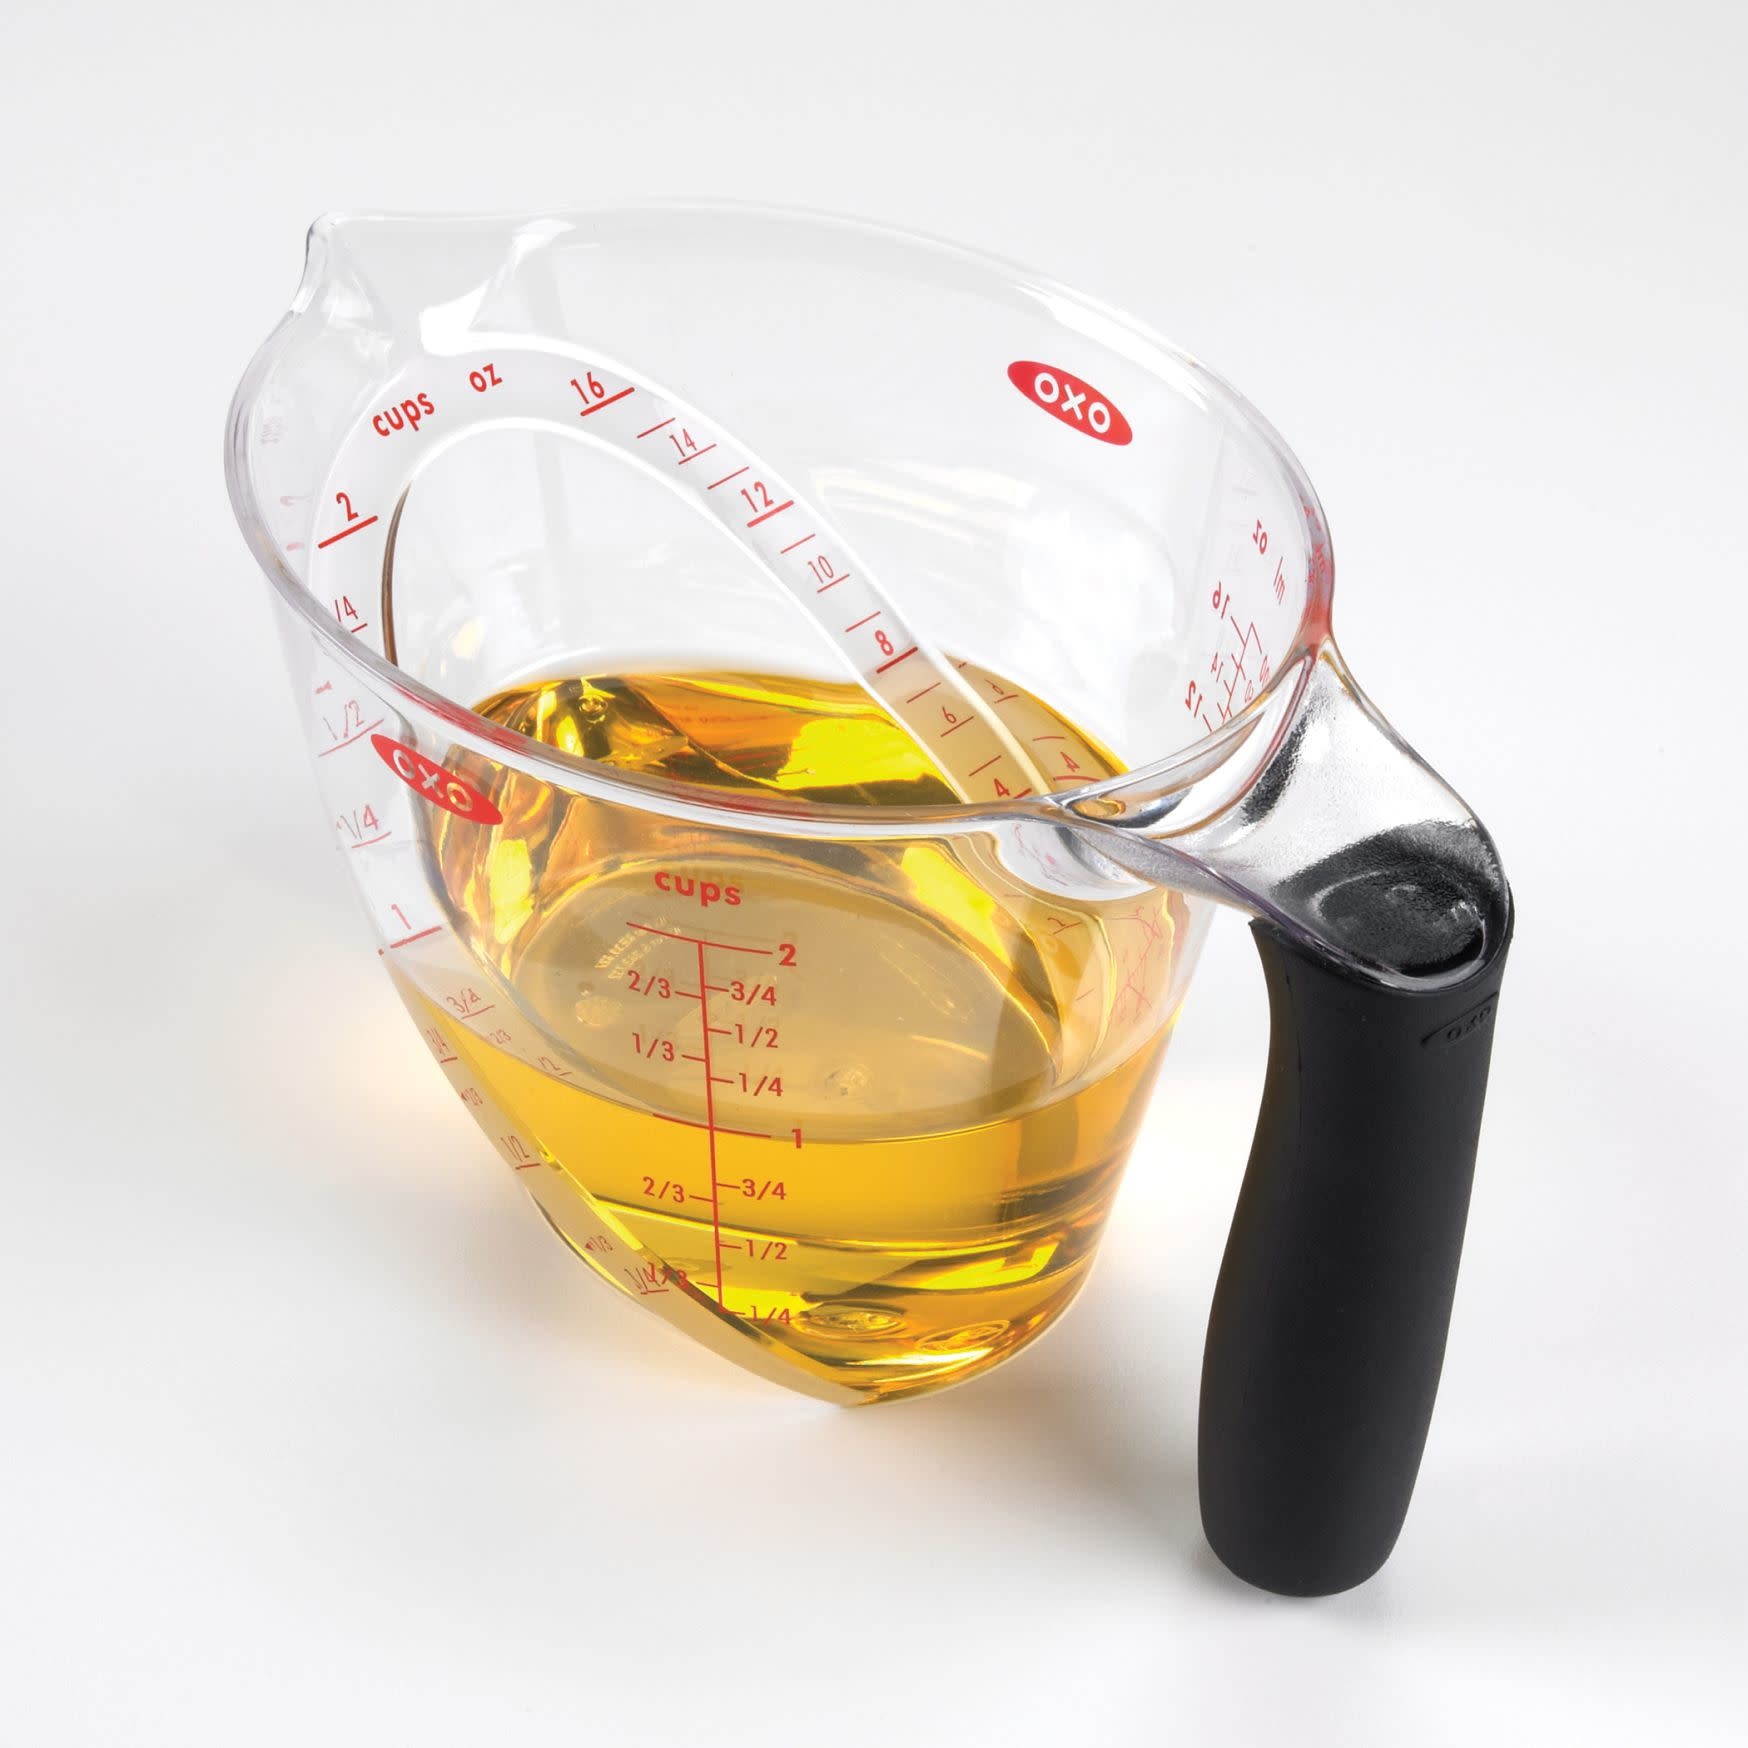 OXO Angled Measuring Cup Angled to let you measure accurately from above  The patented angled surface allows you to see measurement…